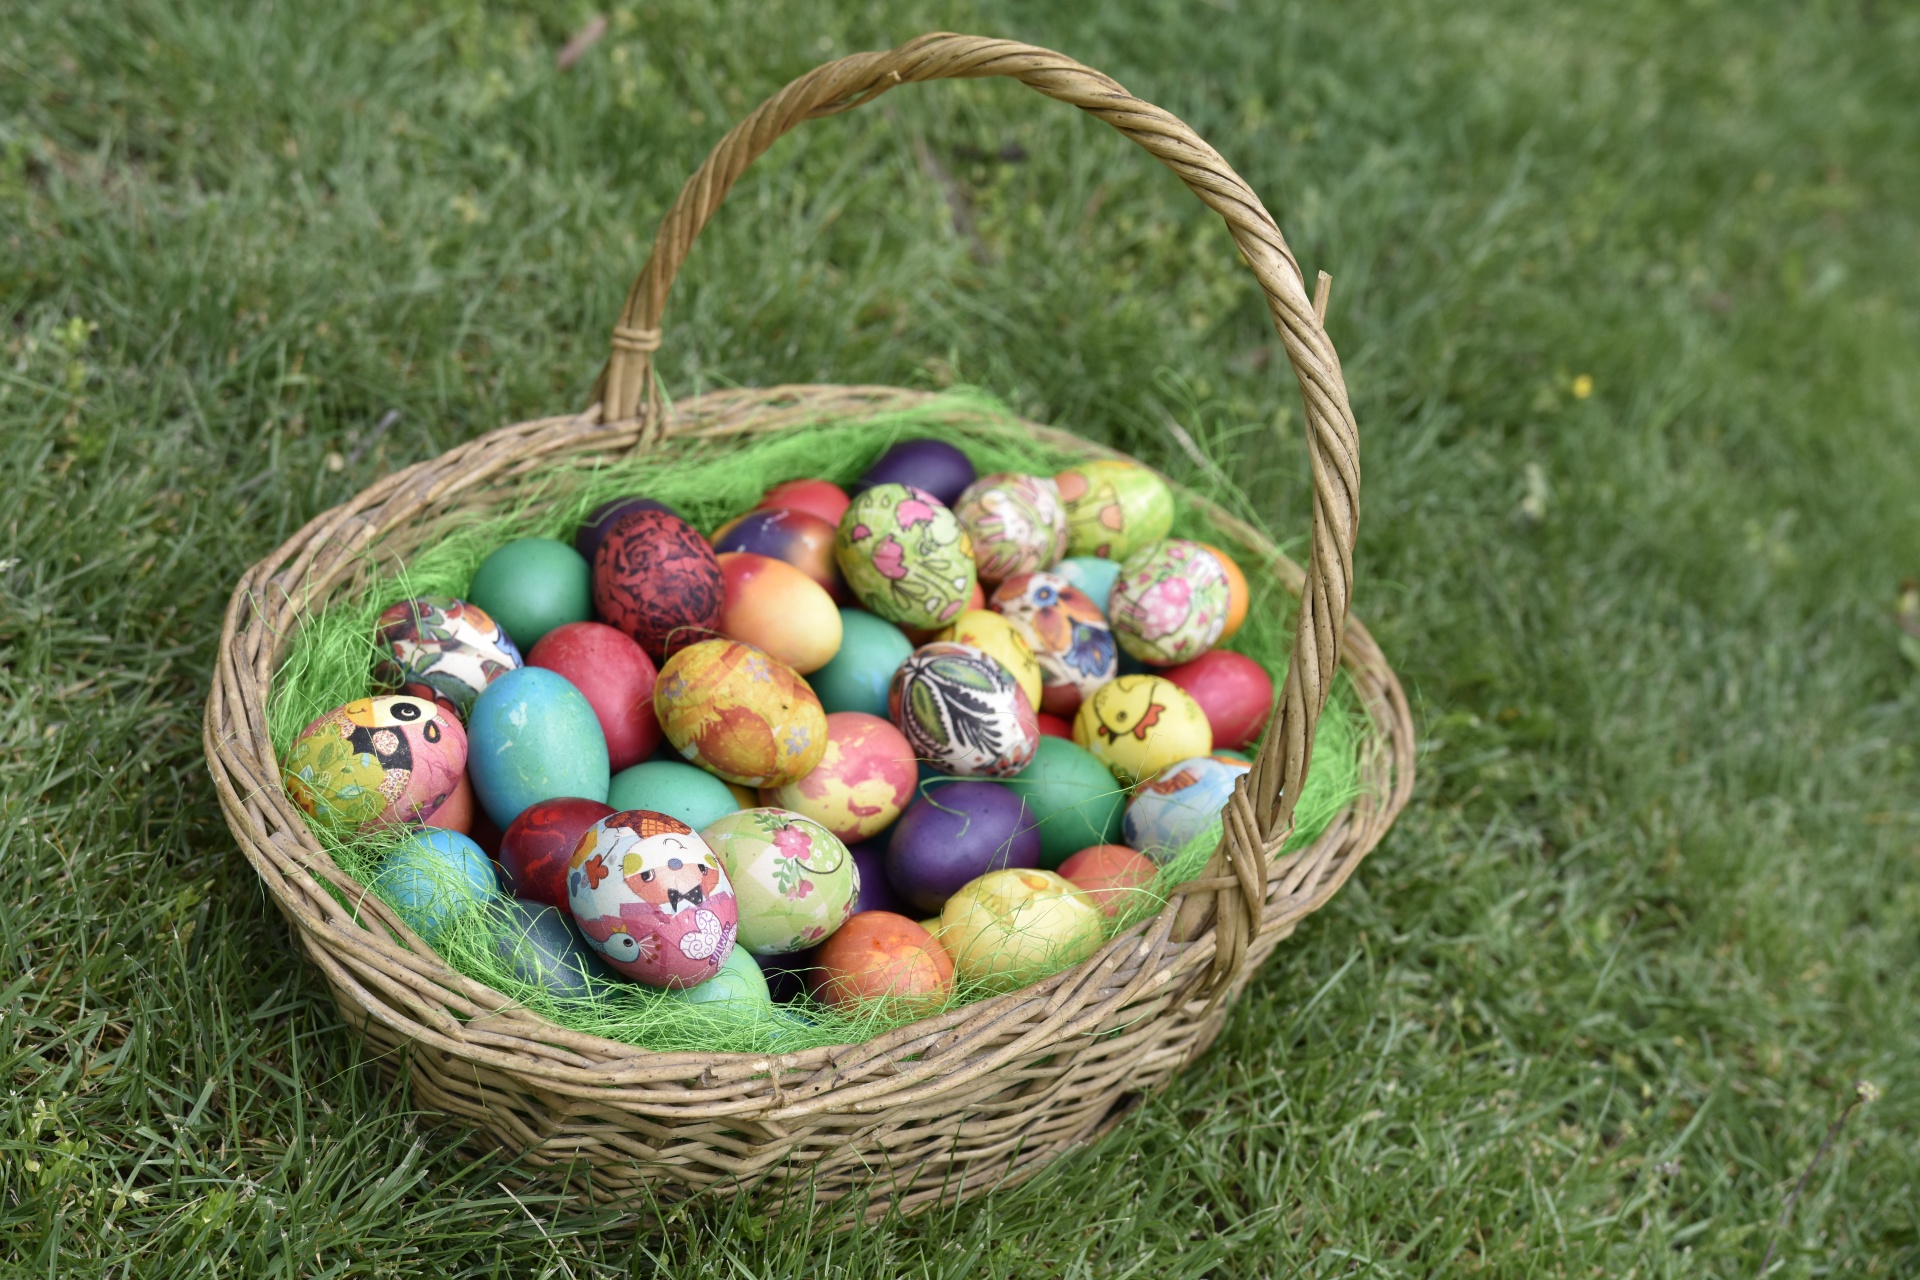 The easter bunny has left his basket in the grass.